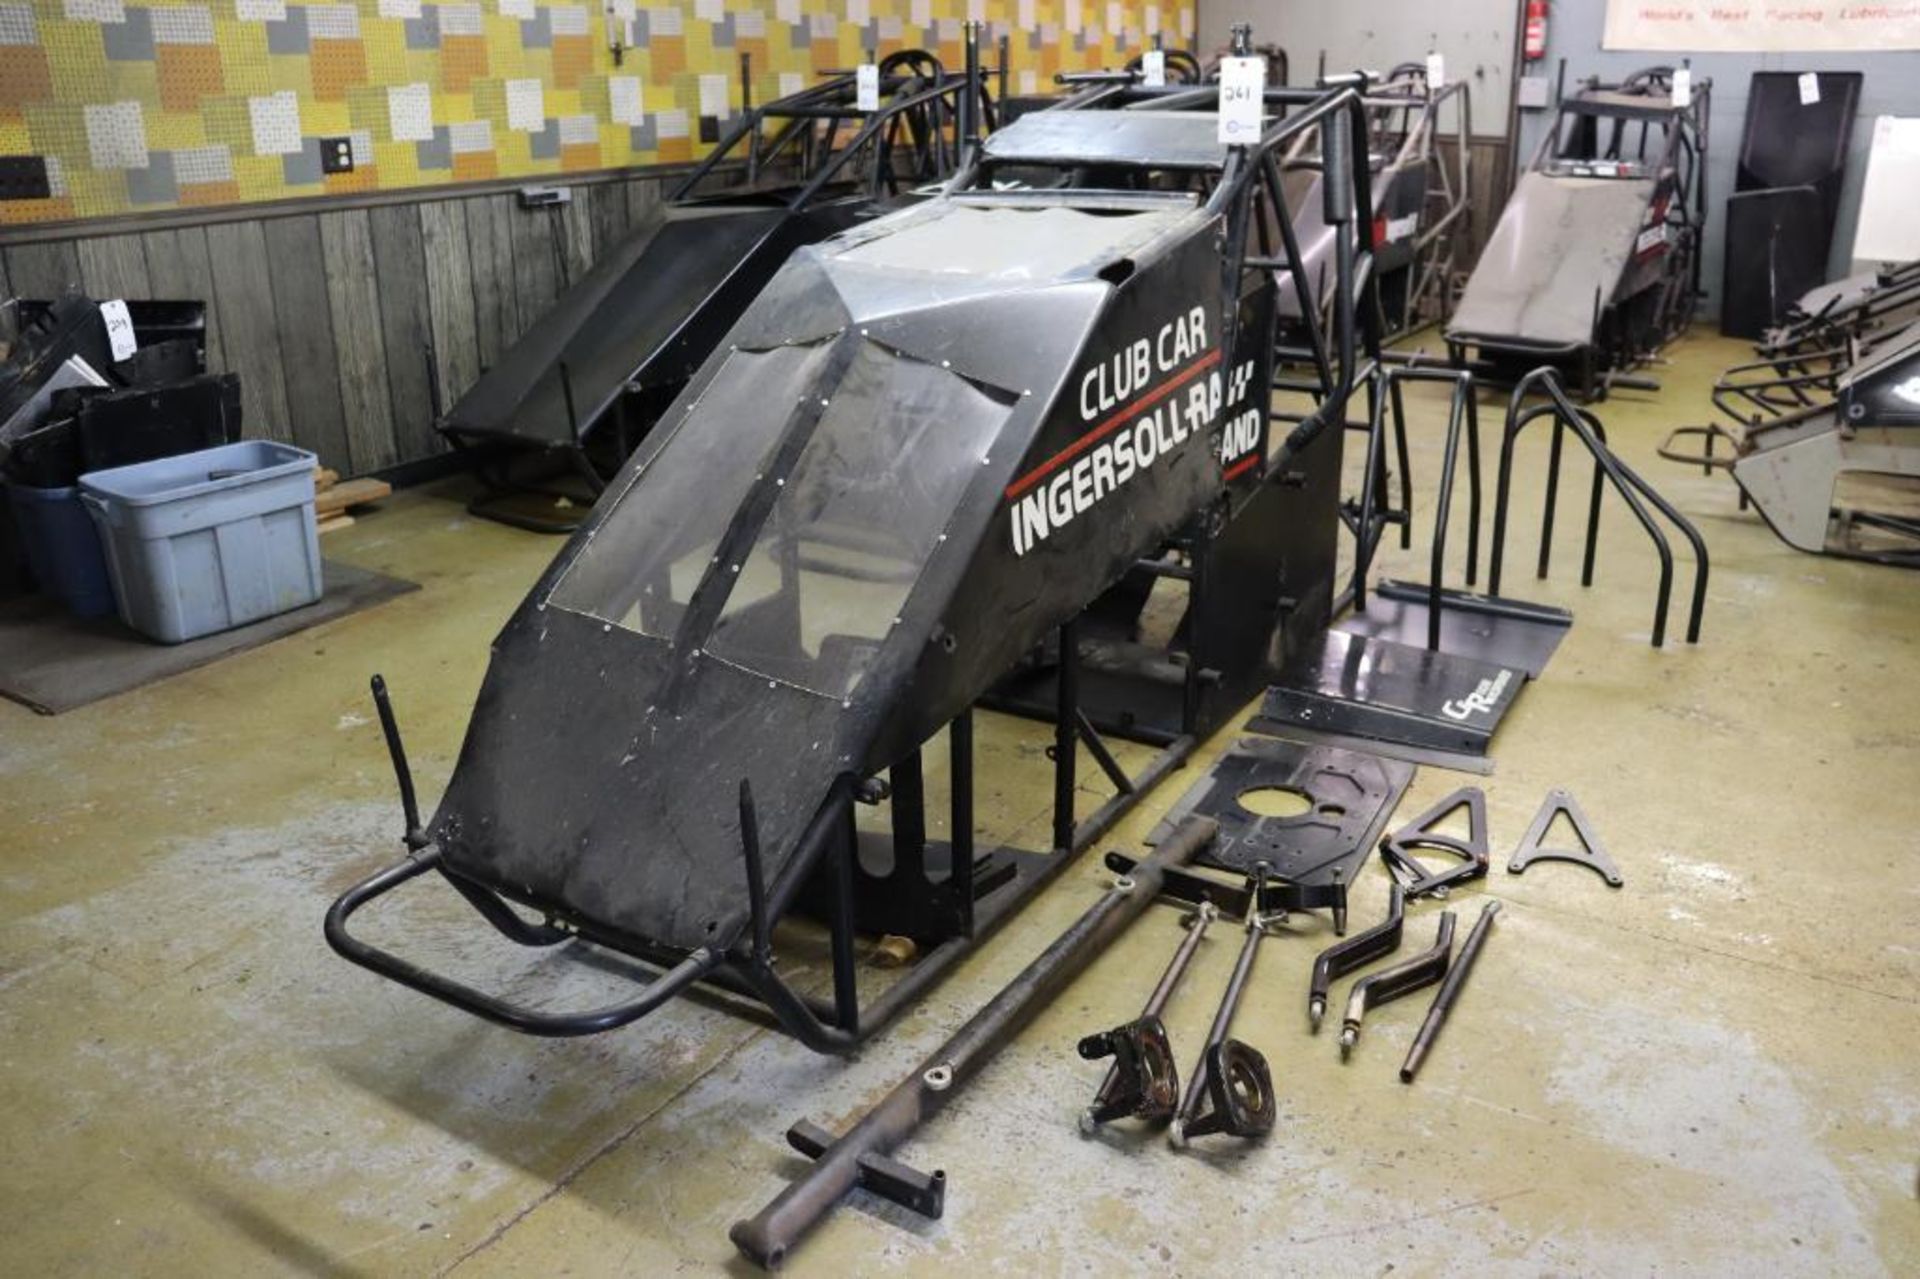 Smith Ingersoll-Rand sprint car w/ body panels & components